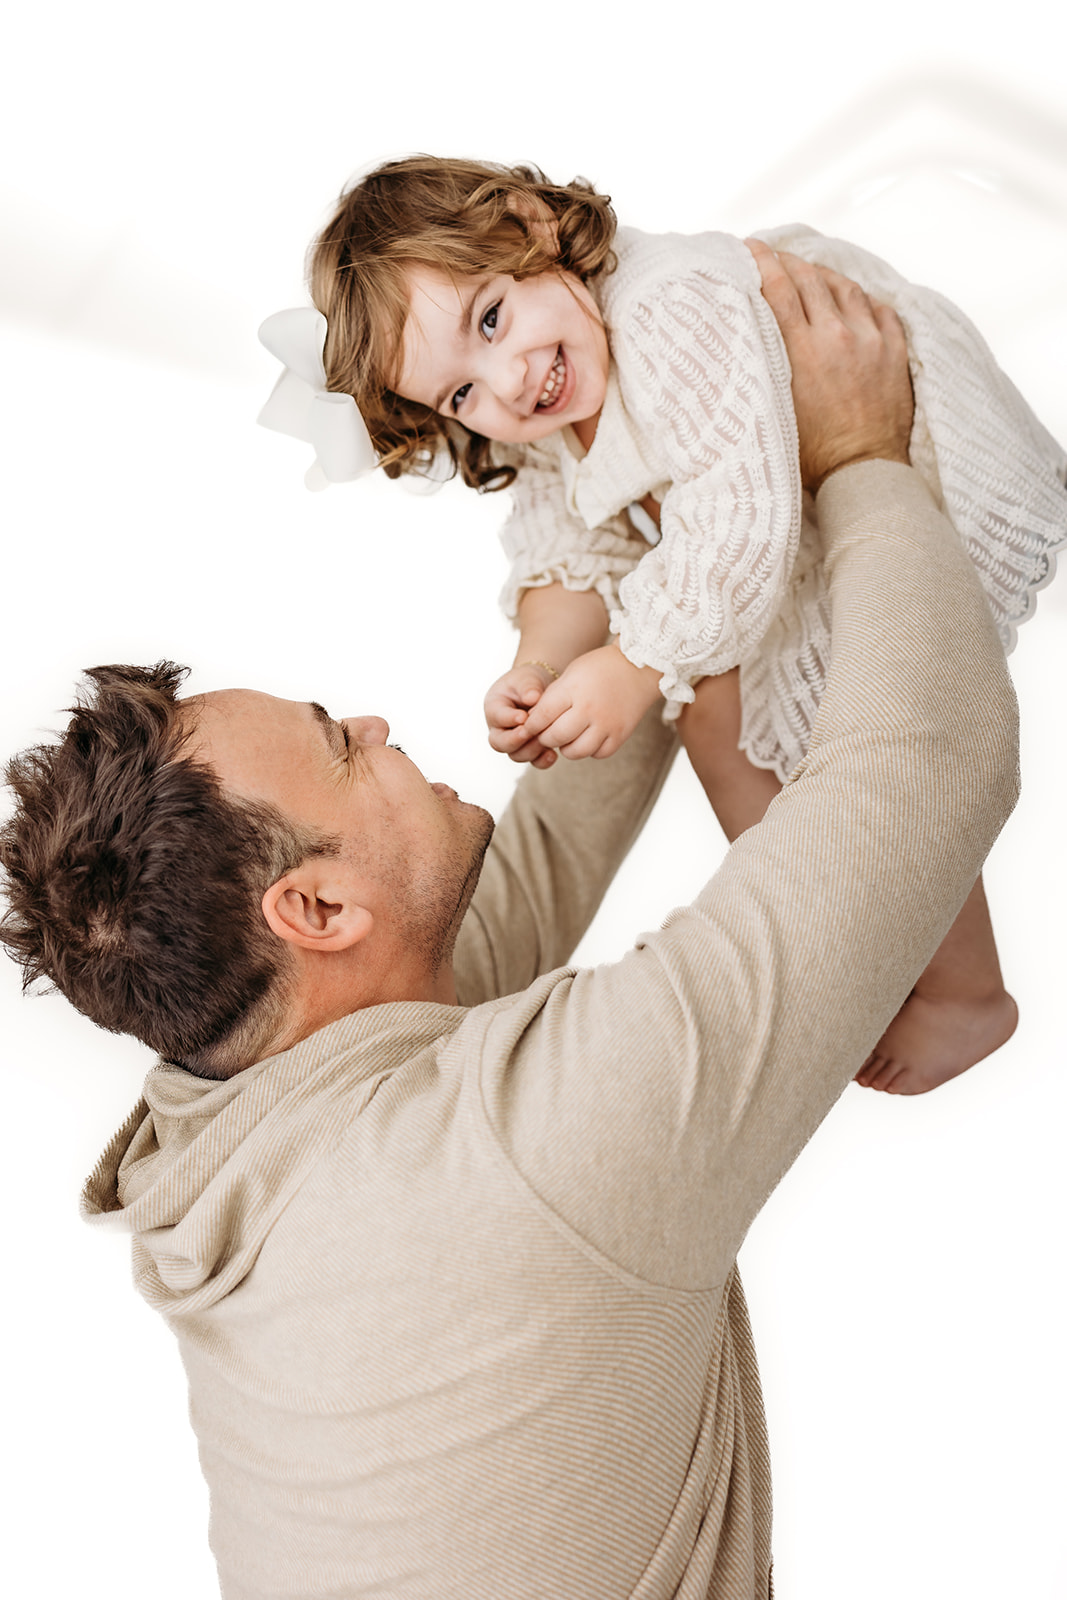 A happy dad lifts and plays with his toddler daughter in a studio after visiting Eau Claire Preschools